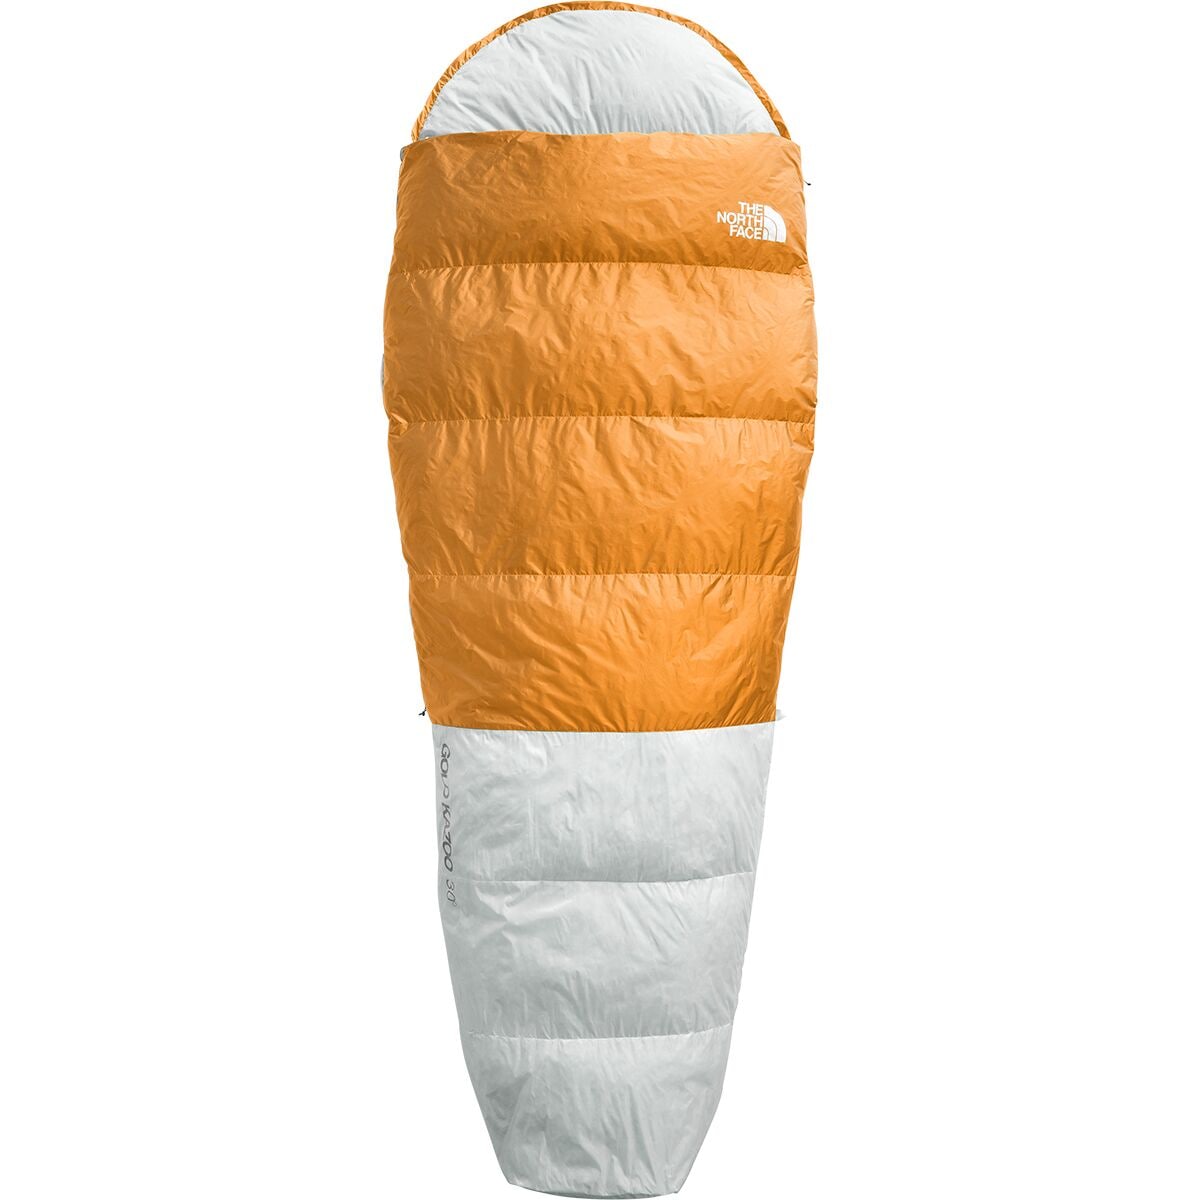 The North Face Gold Kazoo Down Sleeping Bag: 35F Synthetic